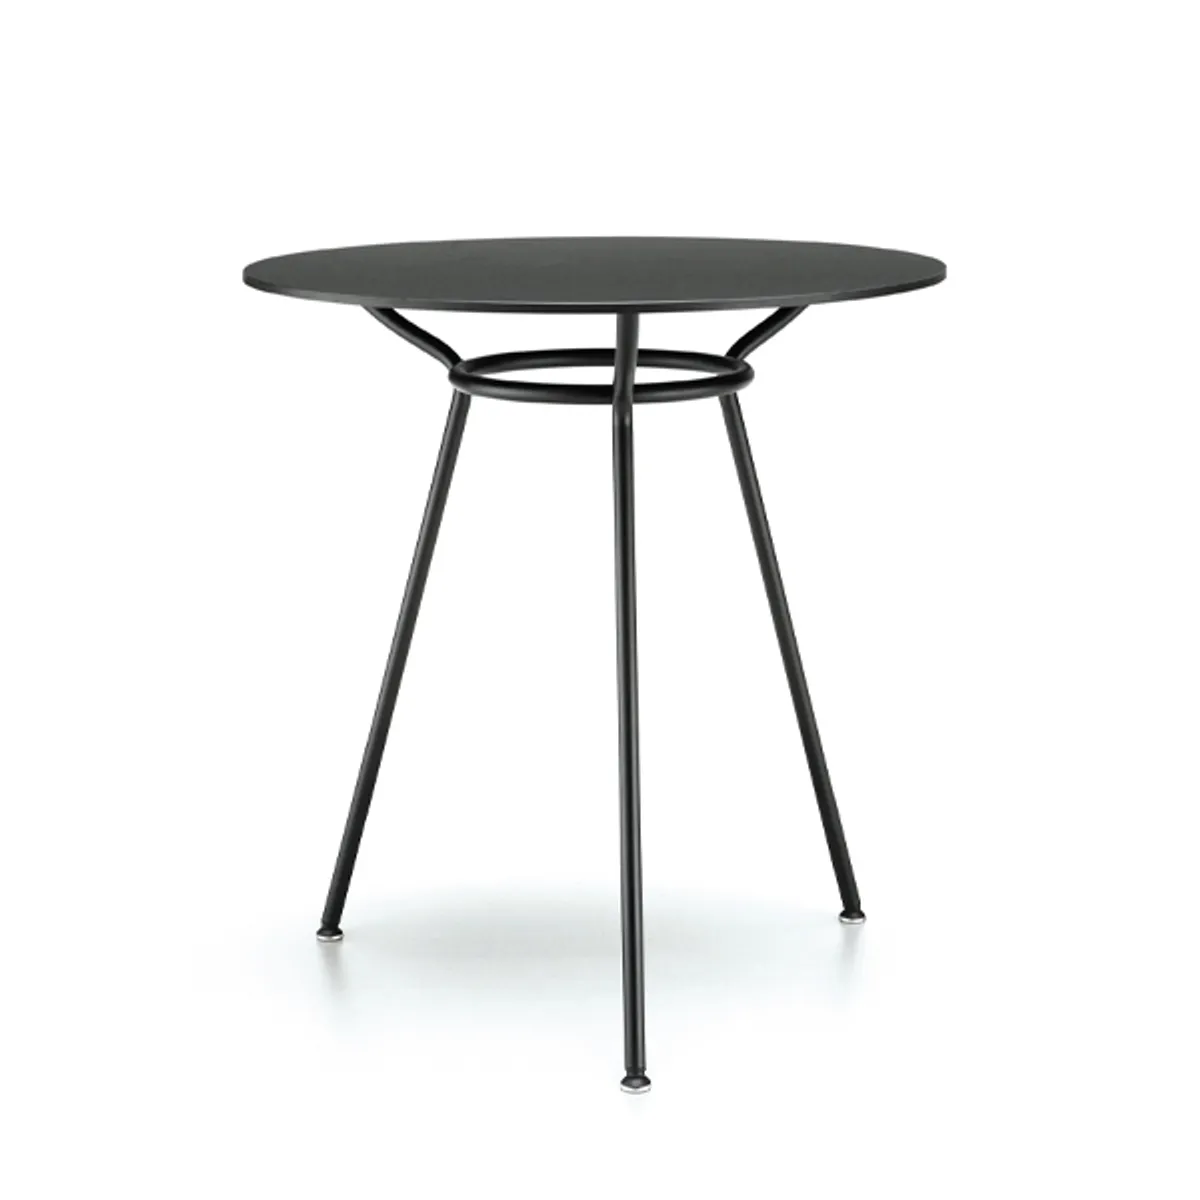 Ola 3 Table Base Exterior Restaurant Furniture Inside Out Contracts 3